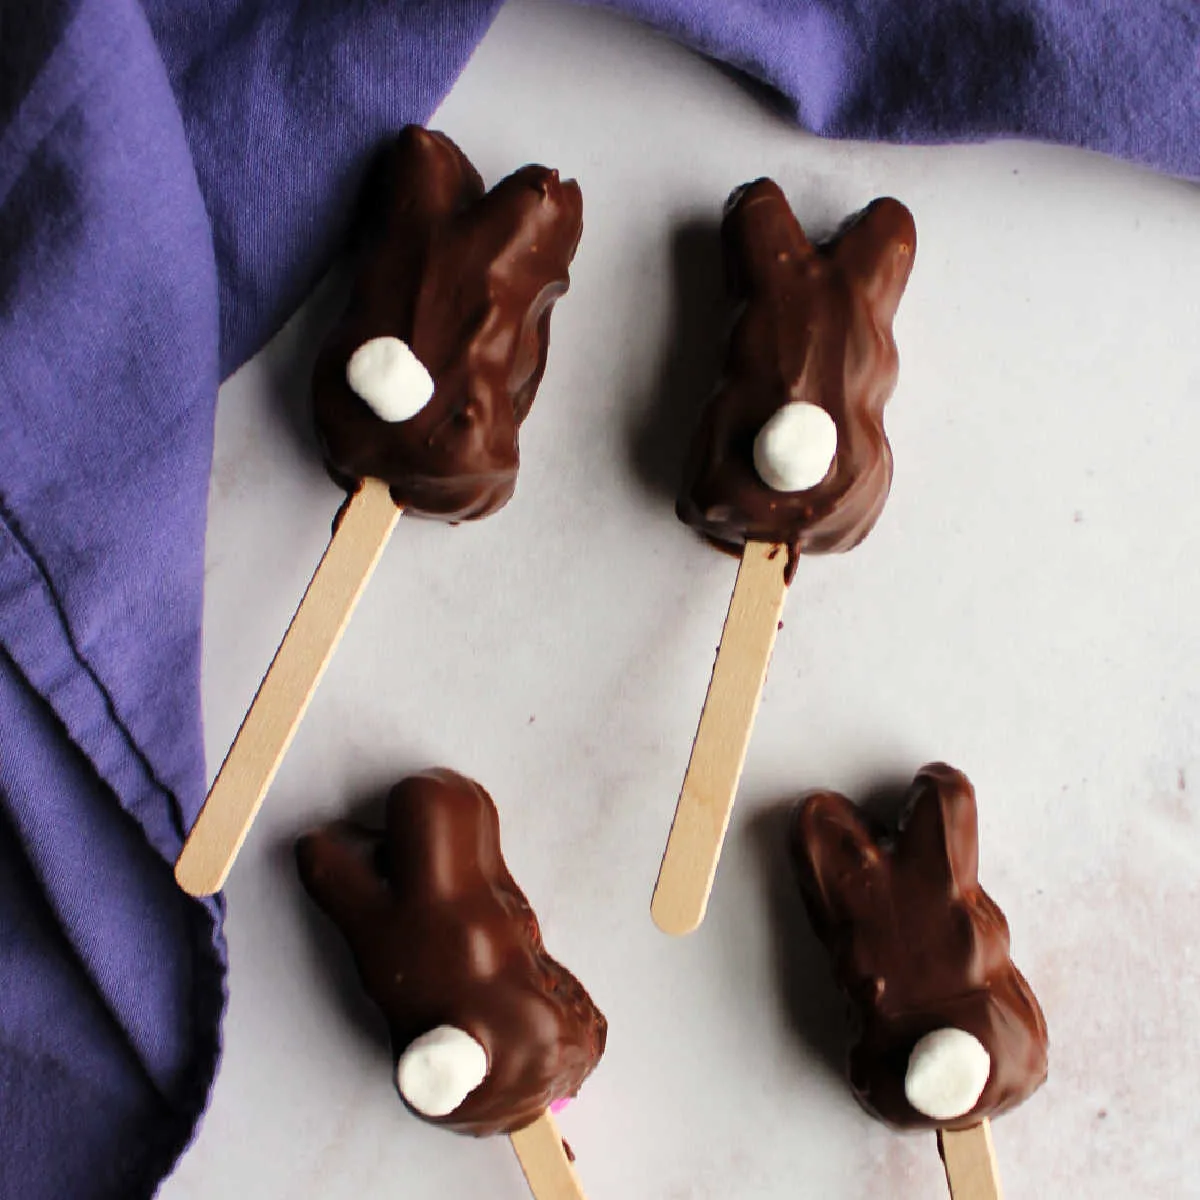 Chocolate dipped marshmallow bunnies with popsicle sticks and marshmallow tails.